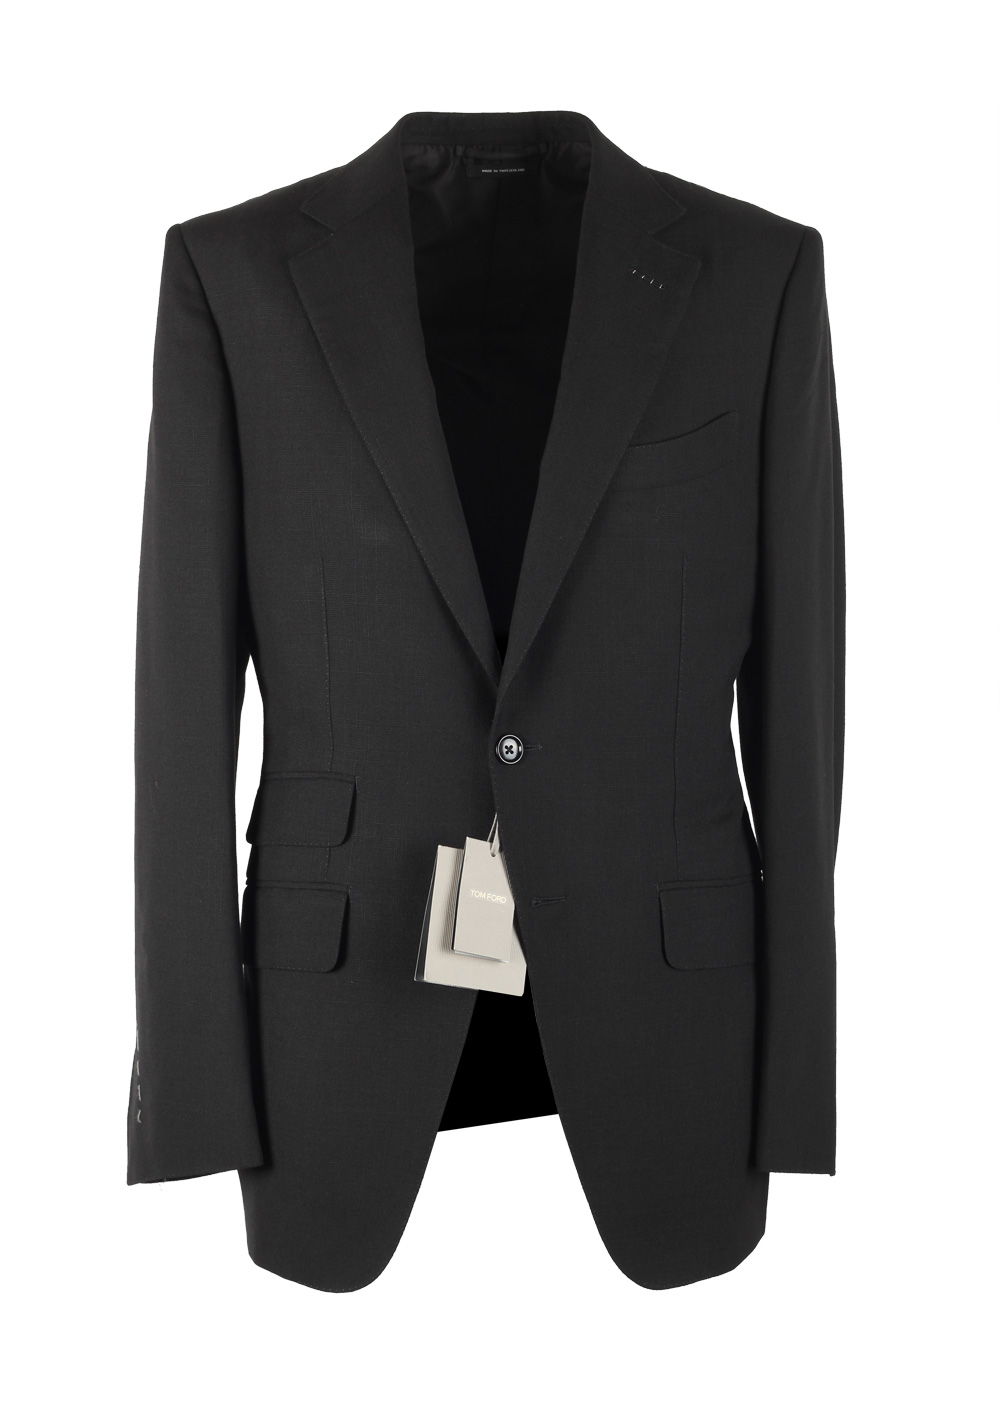 TOM FORD O’Connor Black Sport Coat Size 50 / 40R U.S. Fit Y | Costume ...